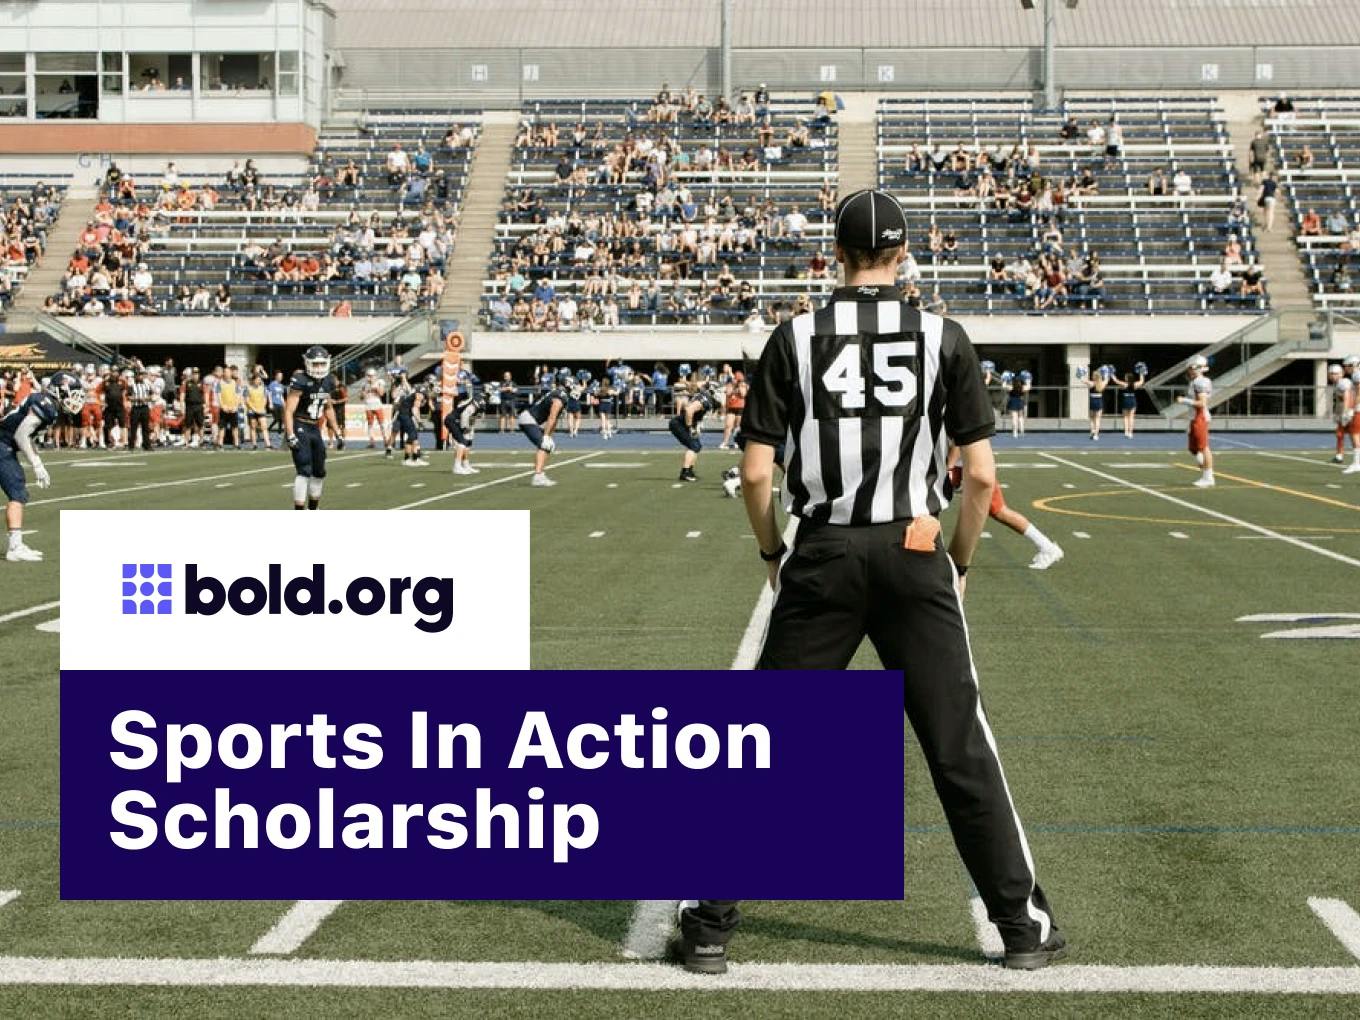 Sports In Action Scholarship